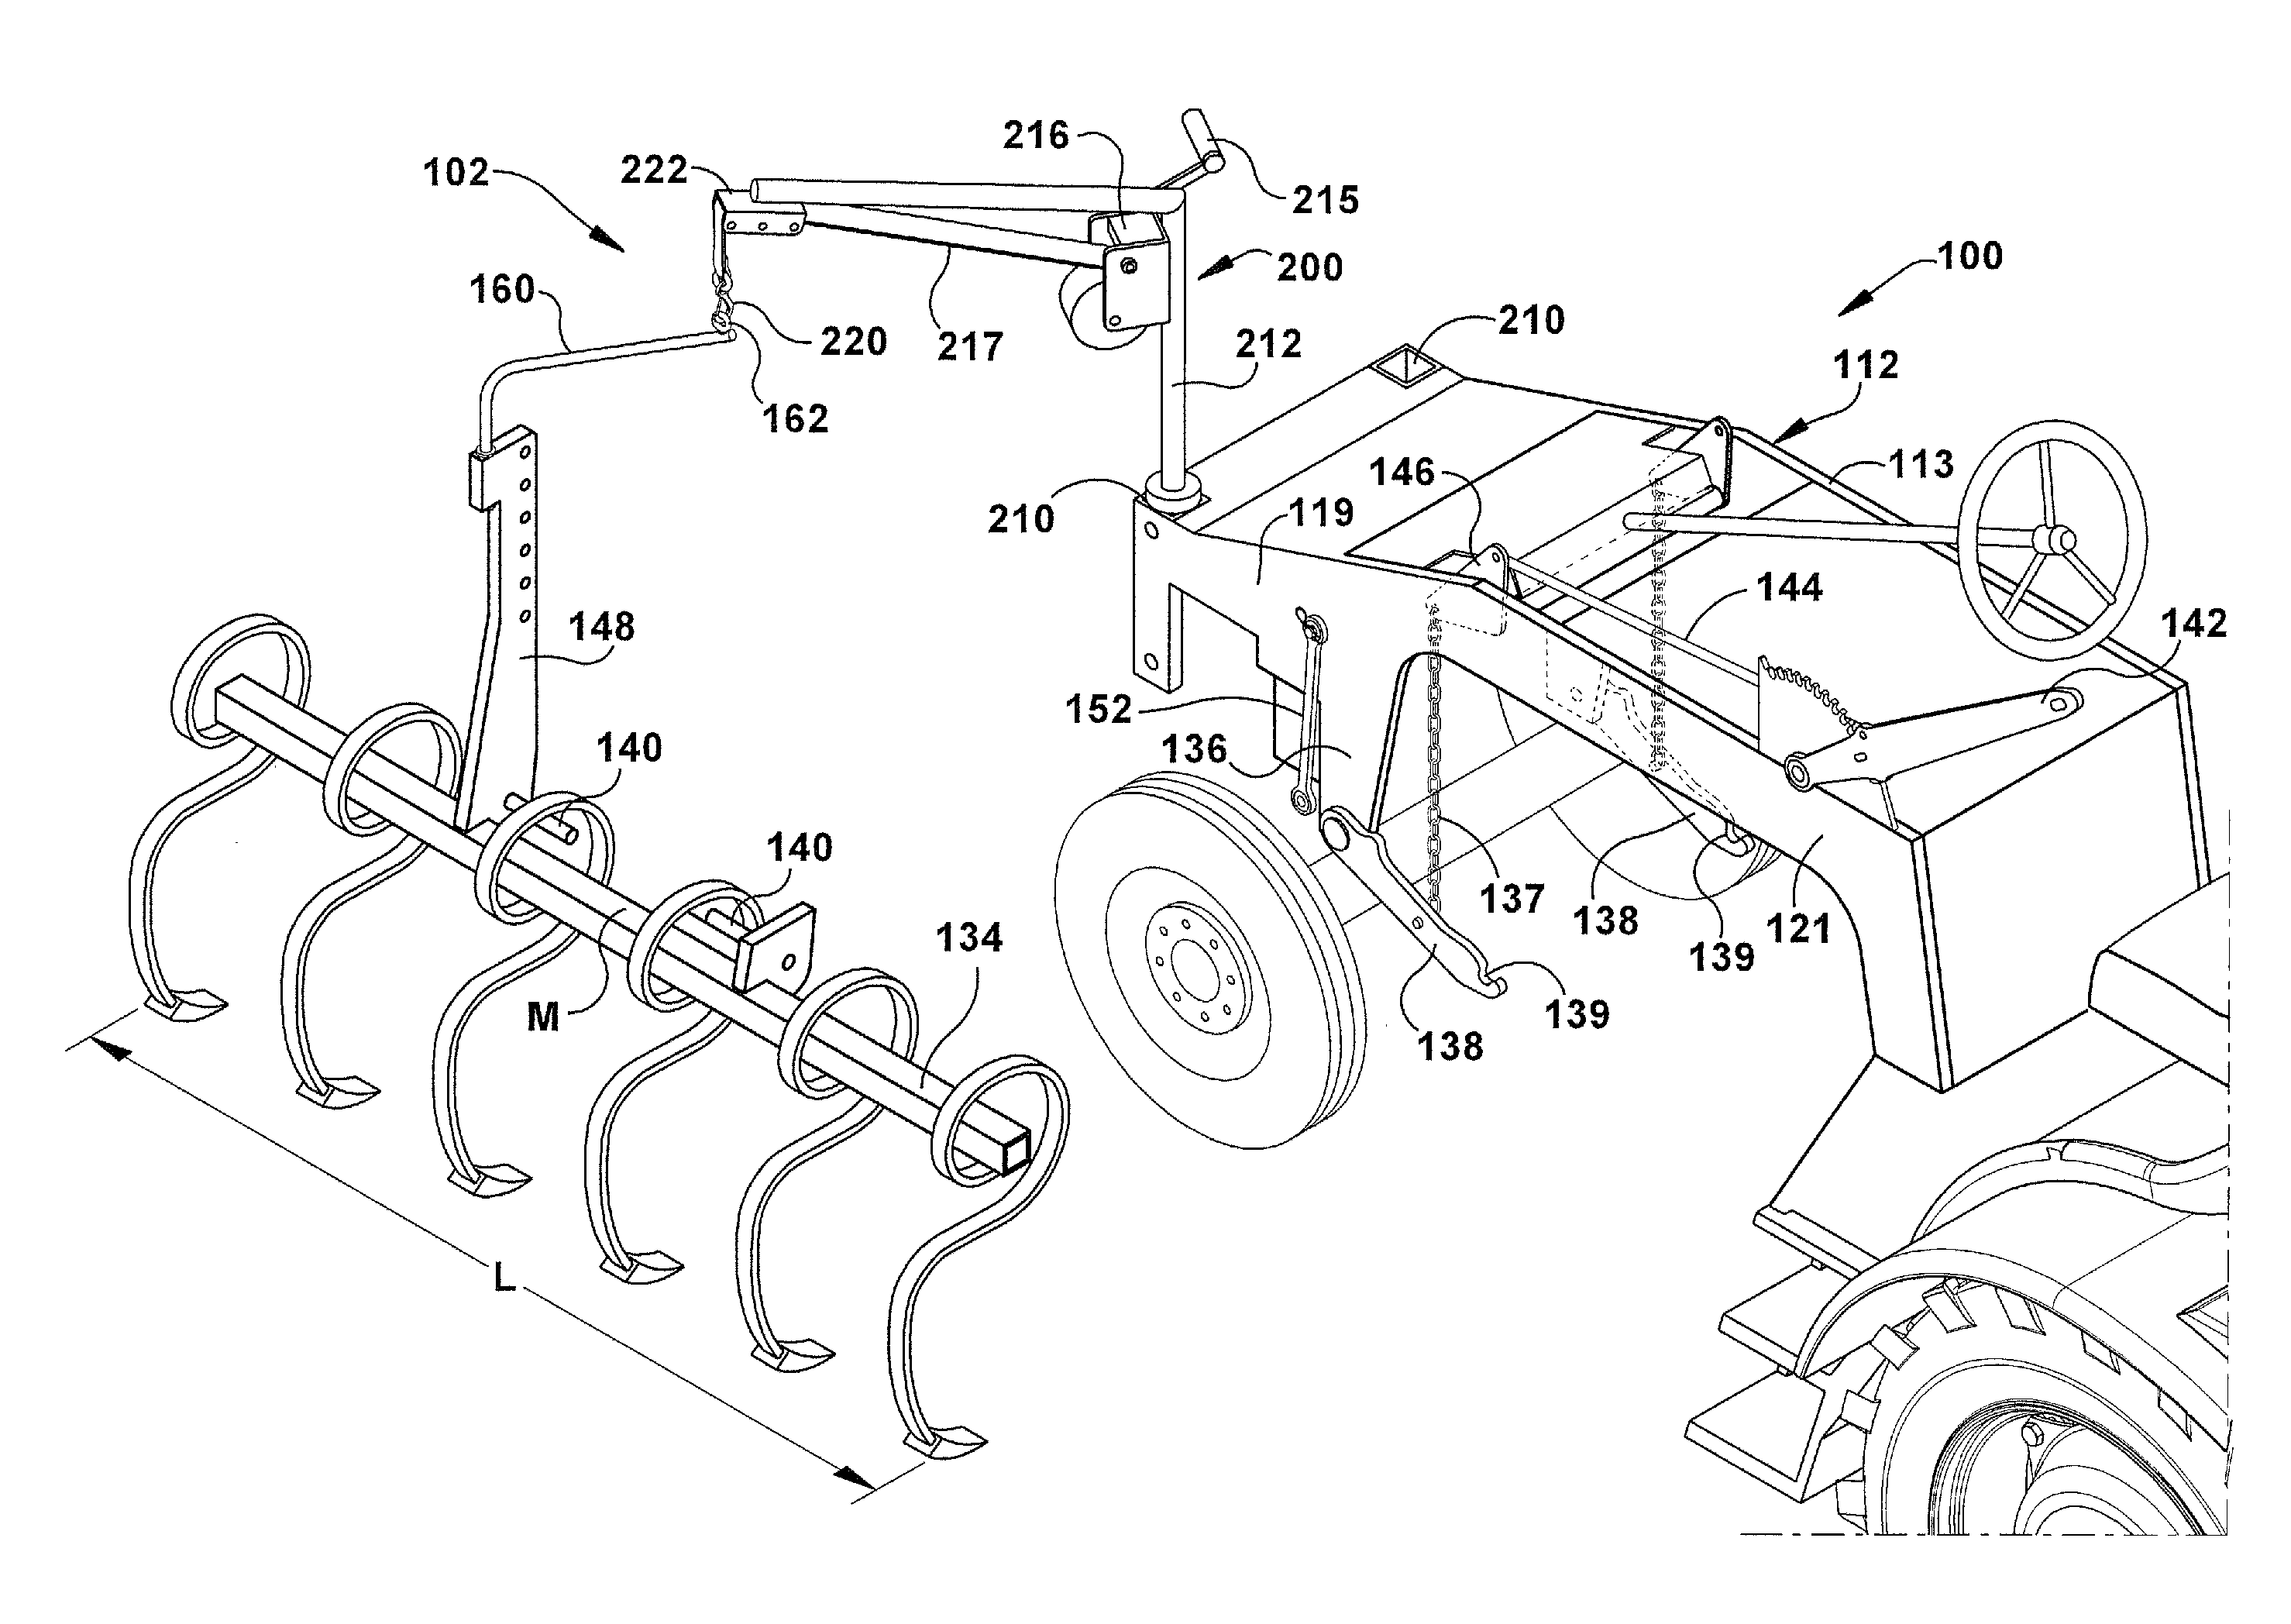 Tractor system and method